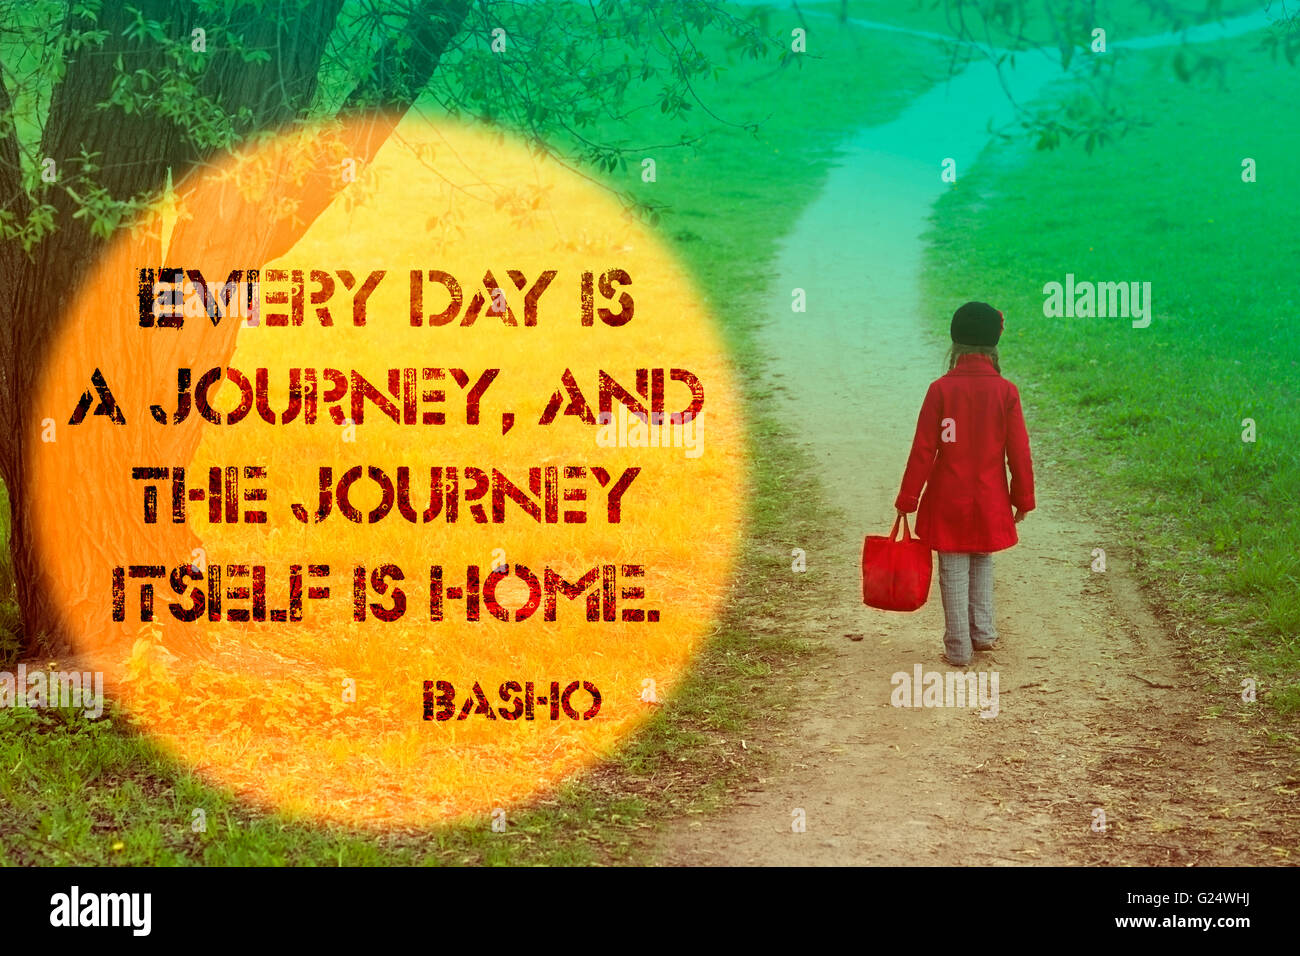 everyday is a journey quote and girl going far away by dirty country road Stock Photo